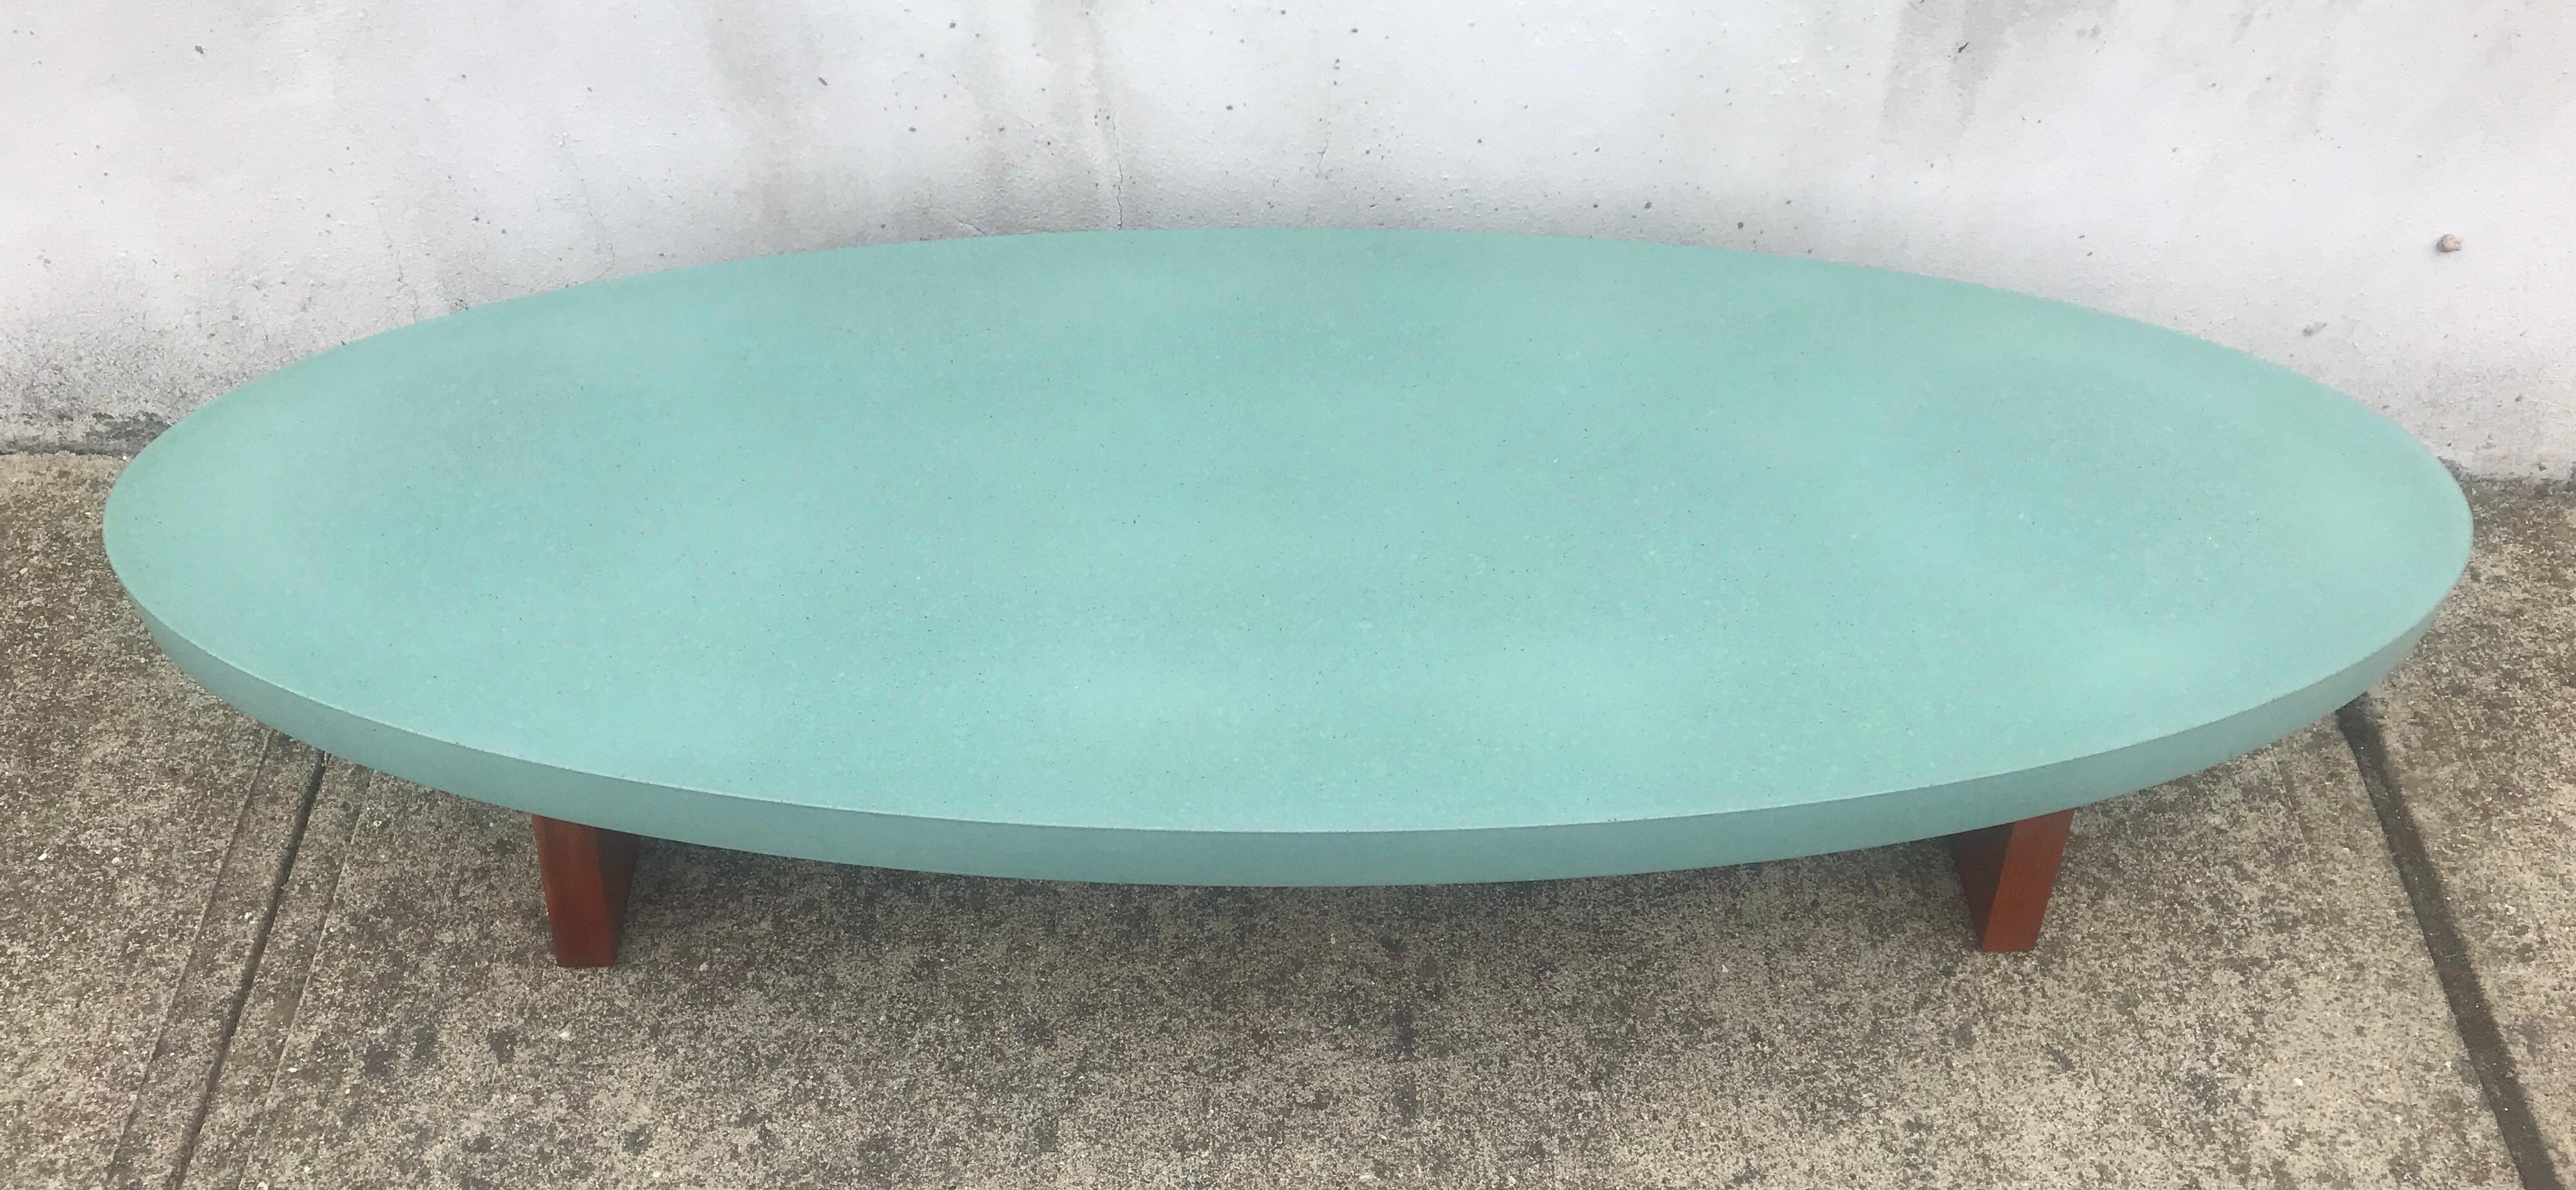 Contemporary Turquoise Oval Coffee Table by Peter Sandback, Ettore Sottsass Style